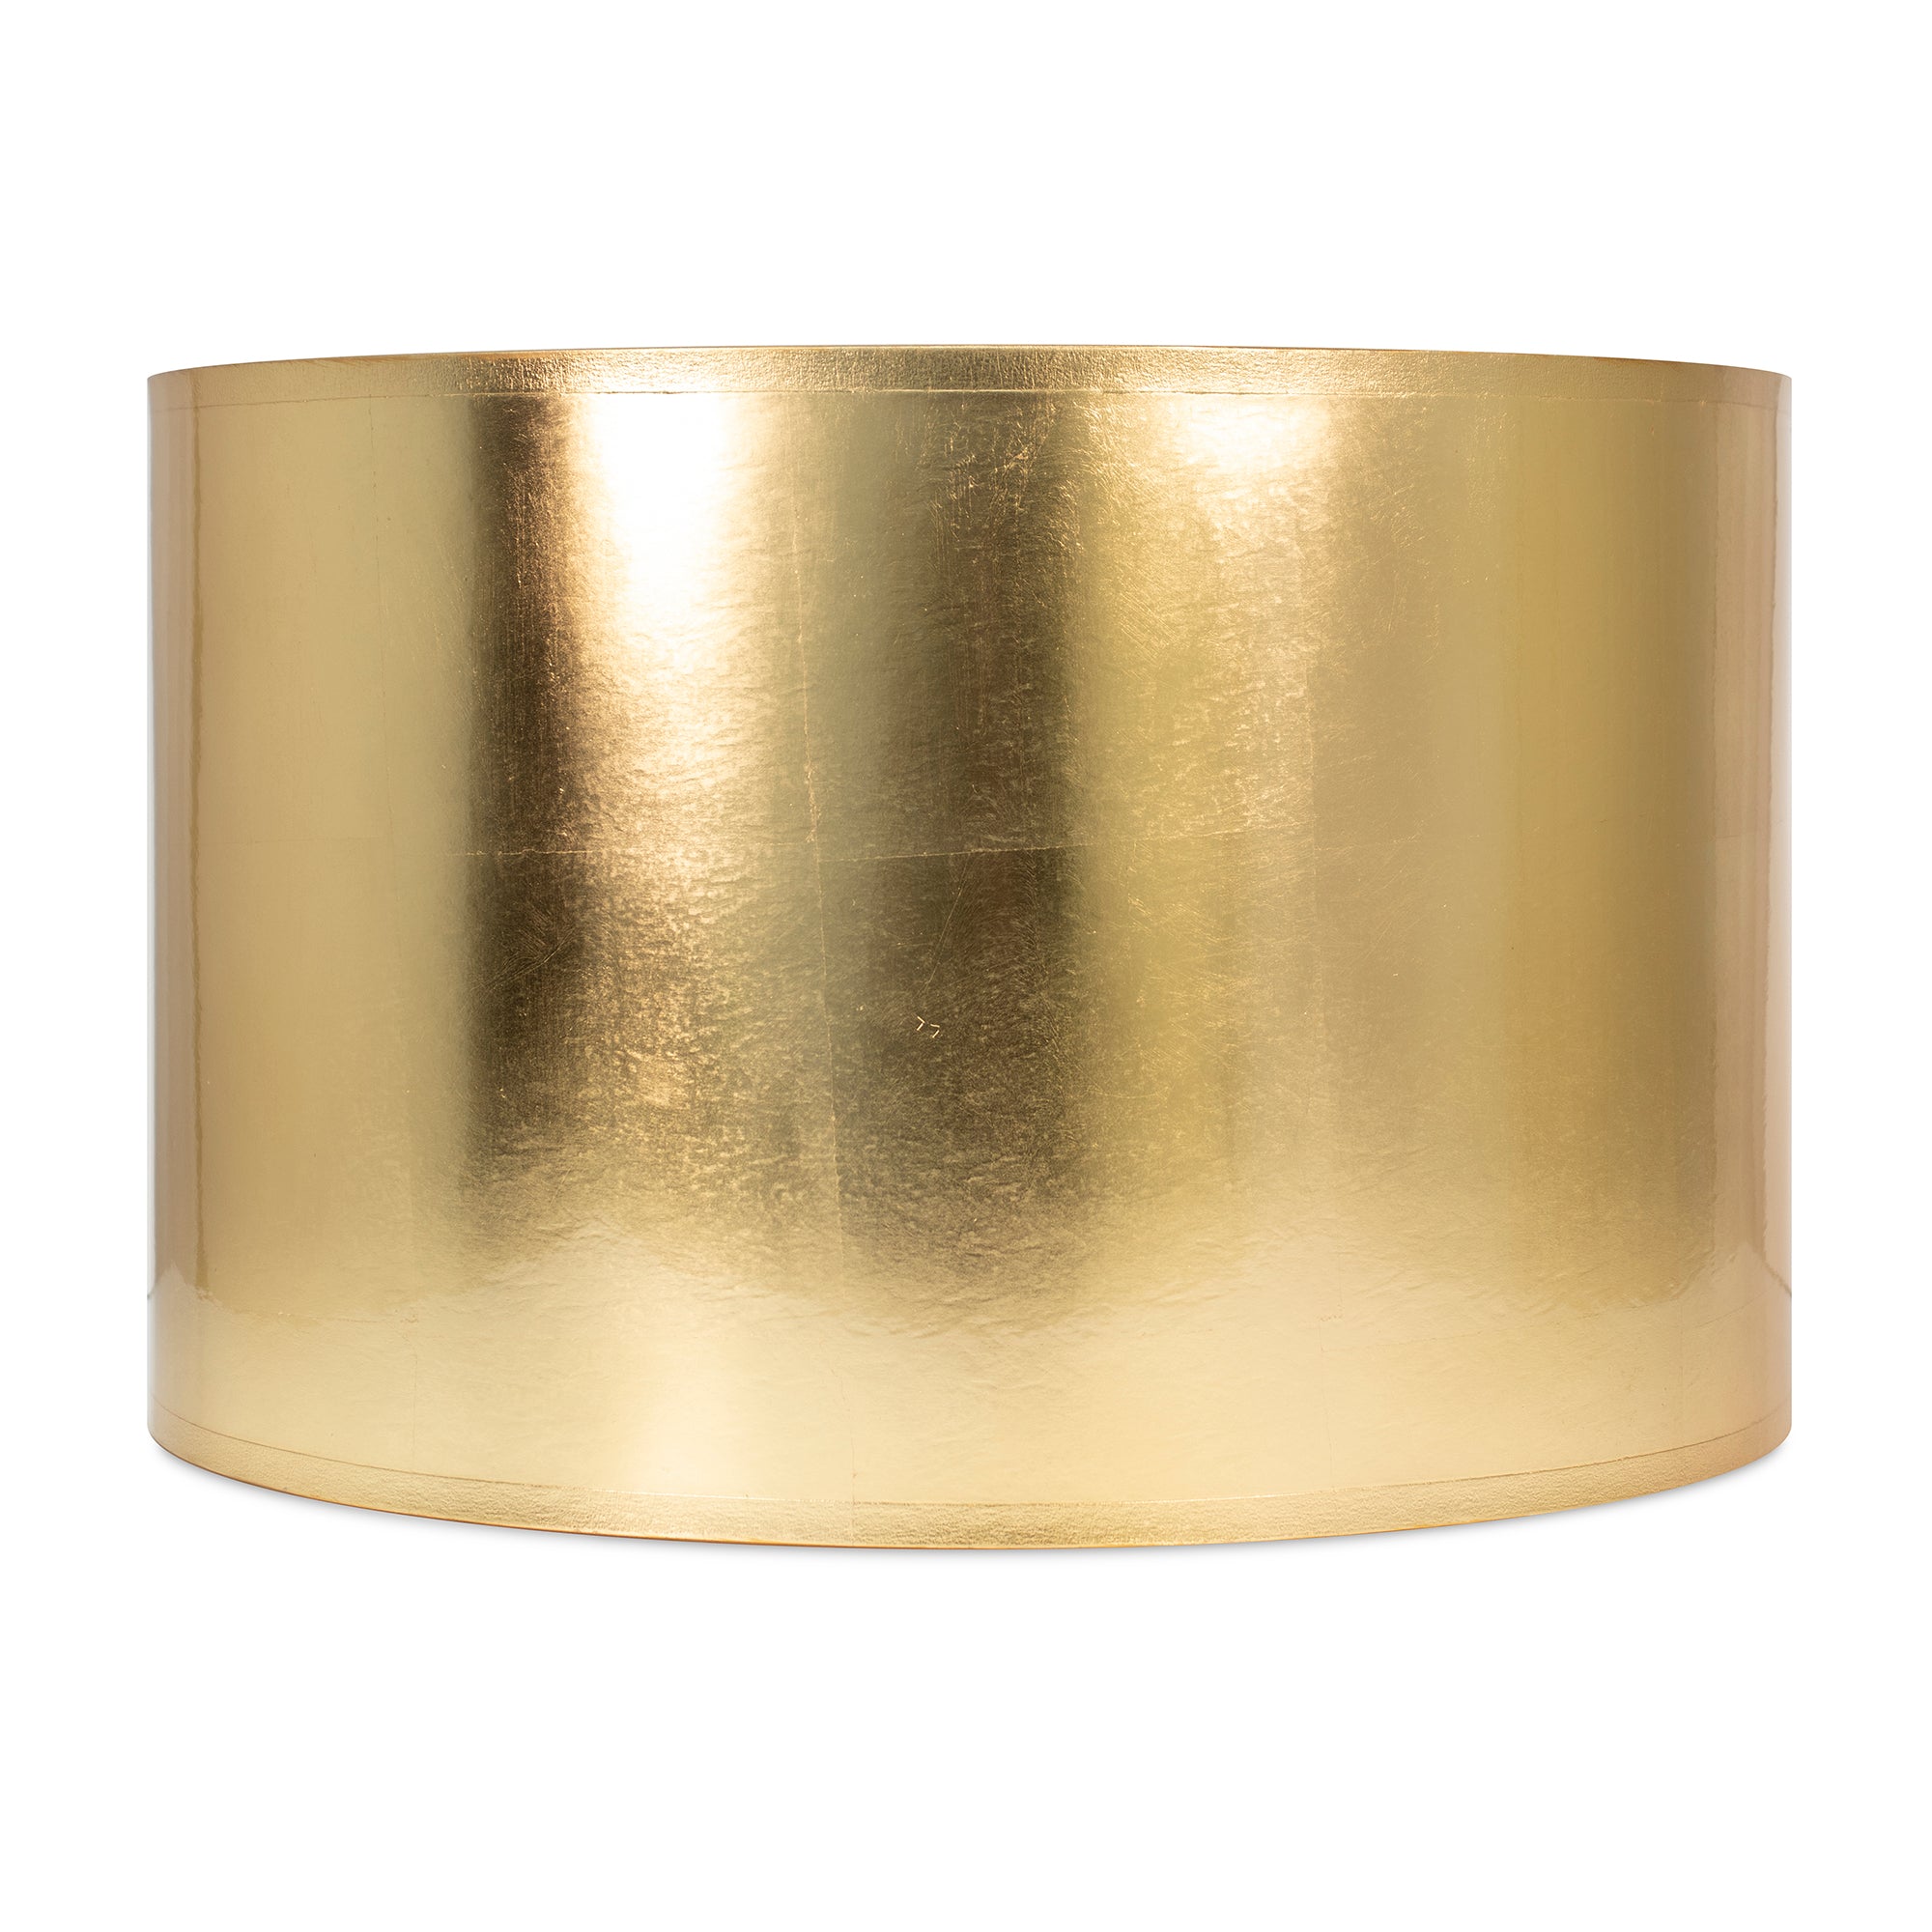 19 x 19 x 12" Round Gold Foil Shade - Couture Lamps